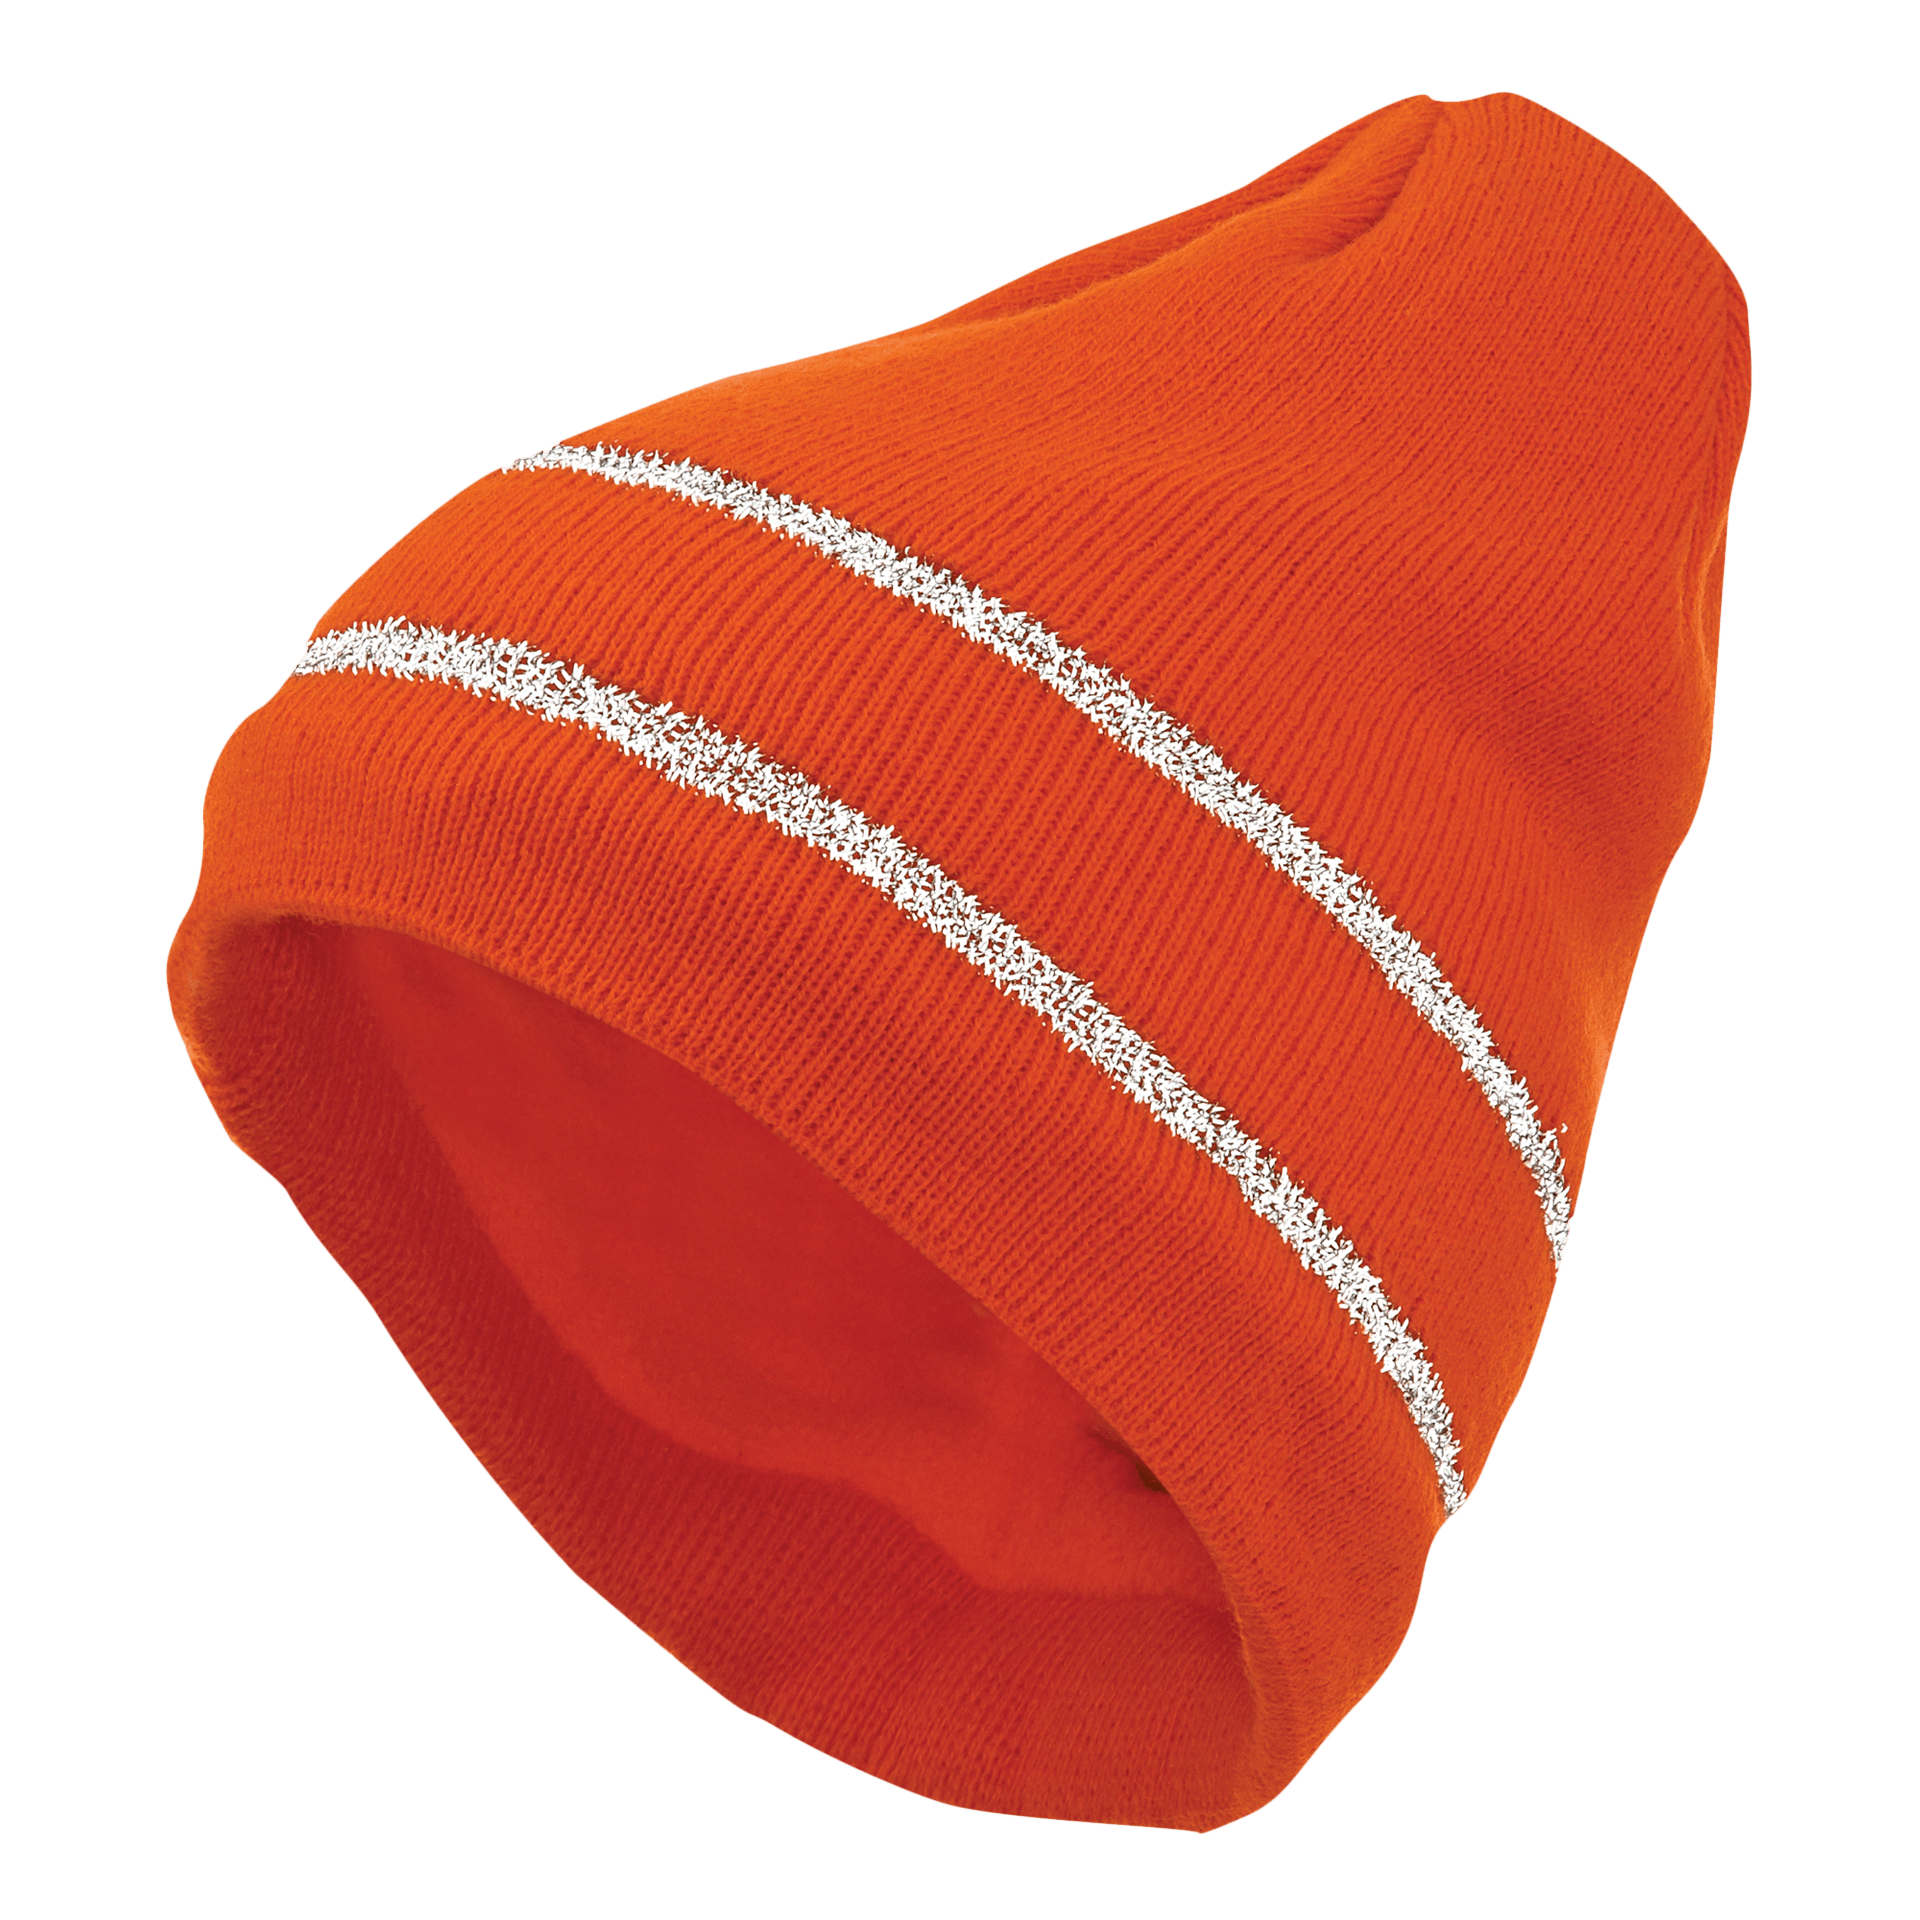 Tough Duck®Acrylic Knit Cap with Reflective Stripe i45816